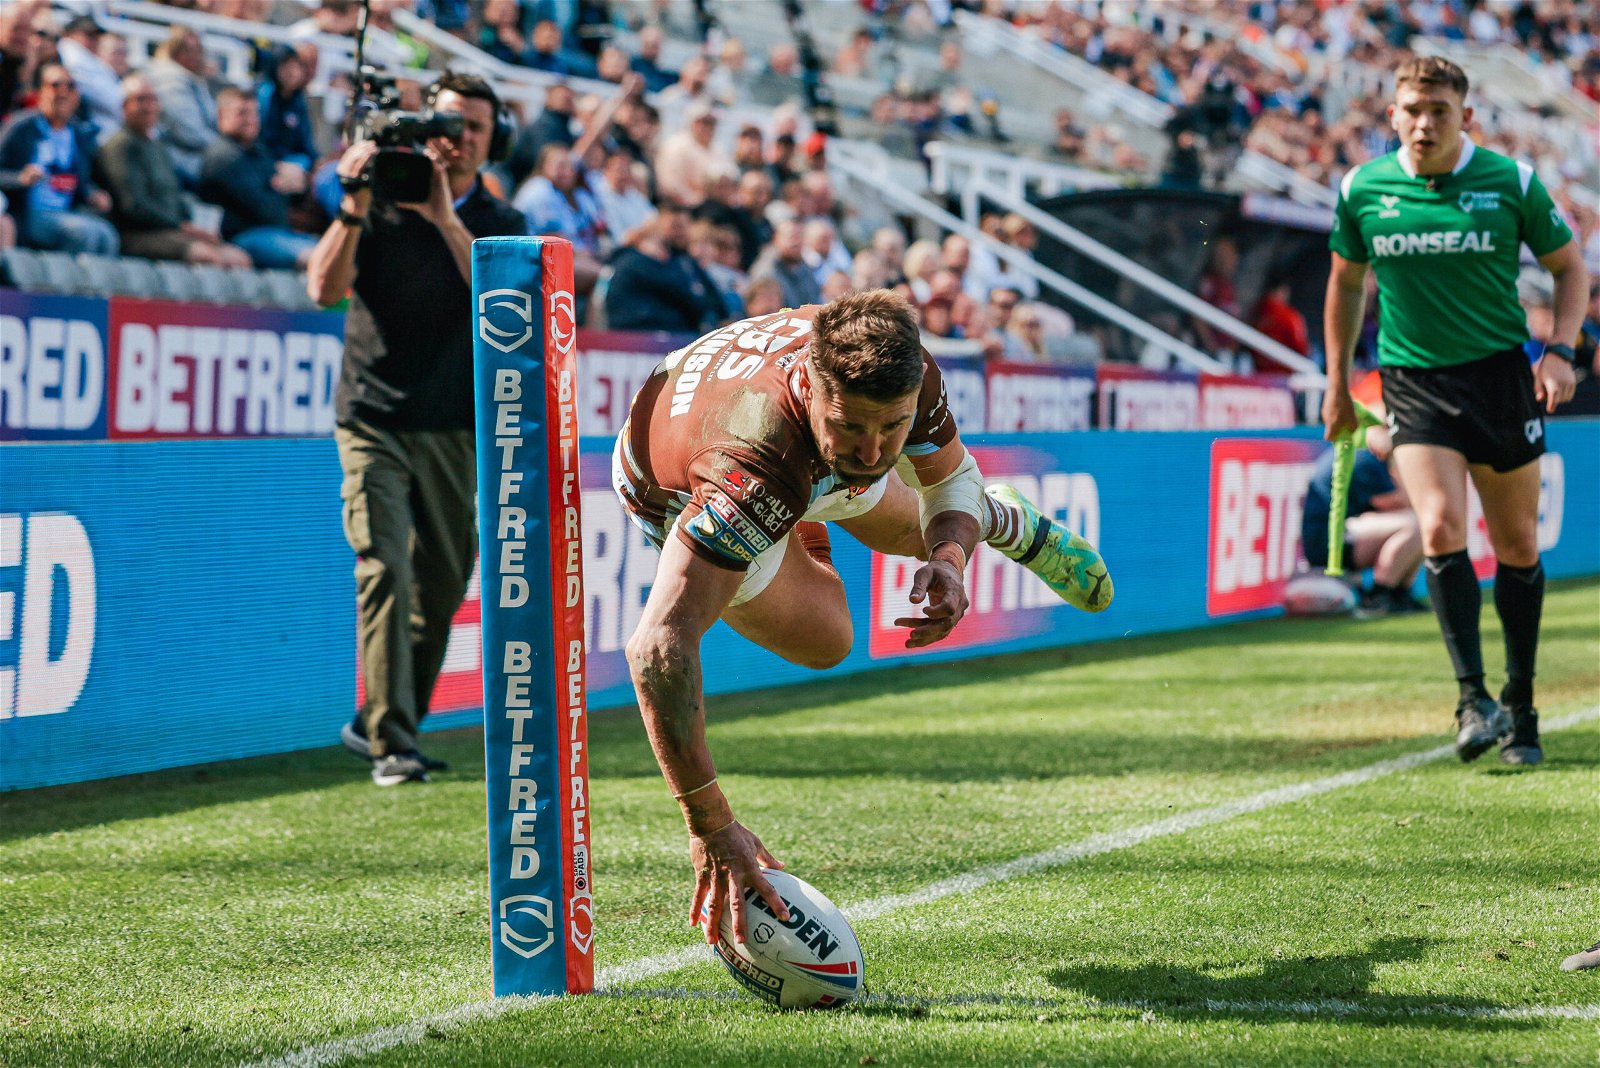 Tommy Makinson scores an acrobatic Super League try in the corner for St Helens